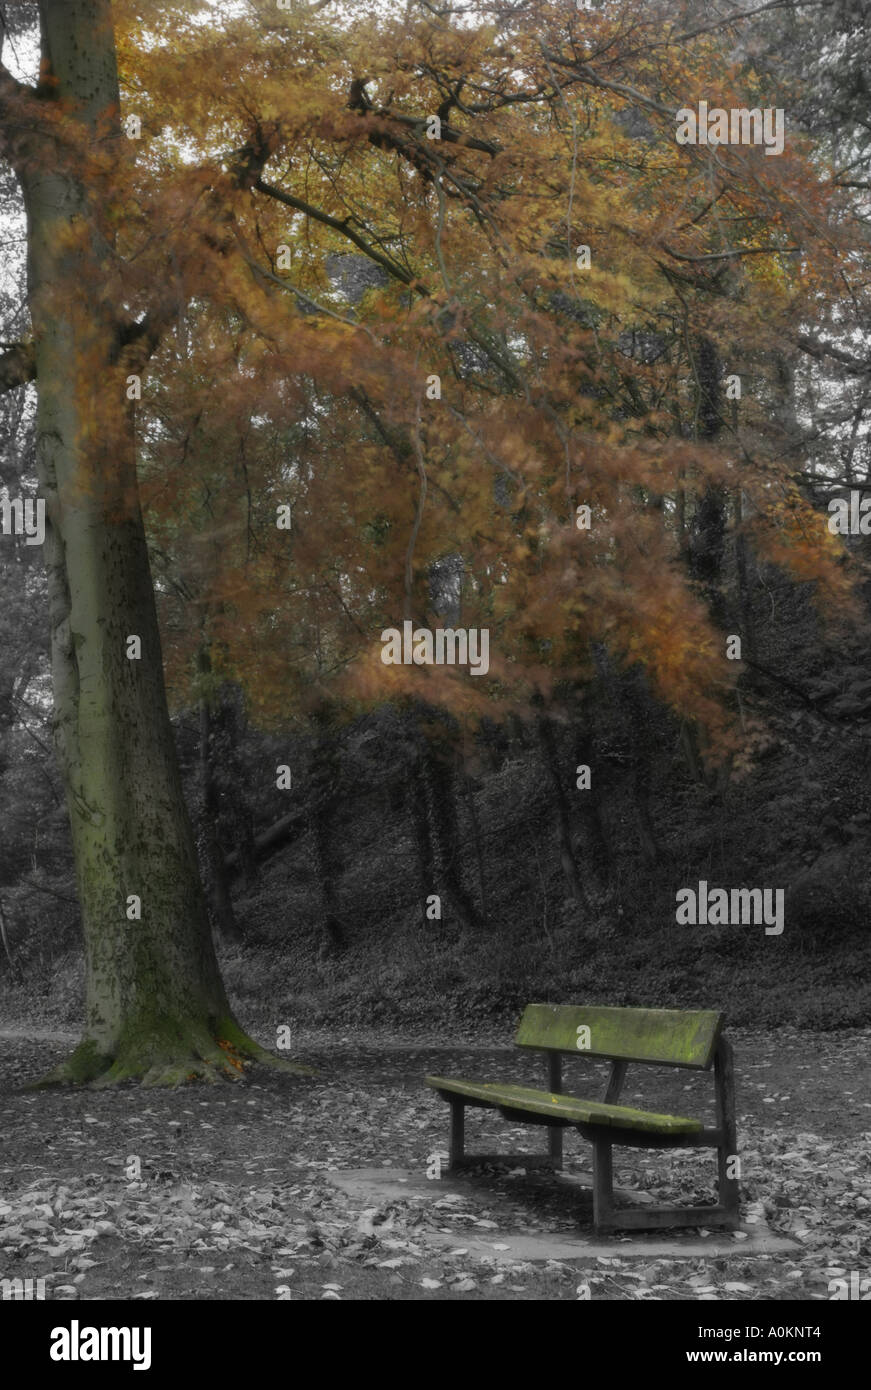 Abstract image of a park bench and autumn tree with orange leaves the bench and leaves are in colour the rest is black and white Stock Photo